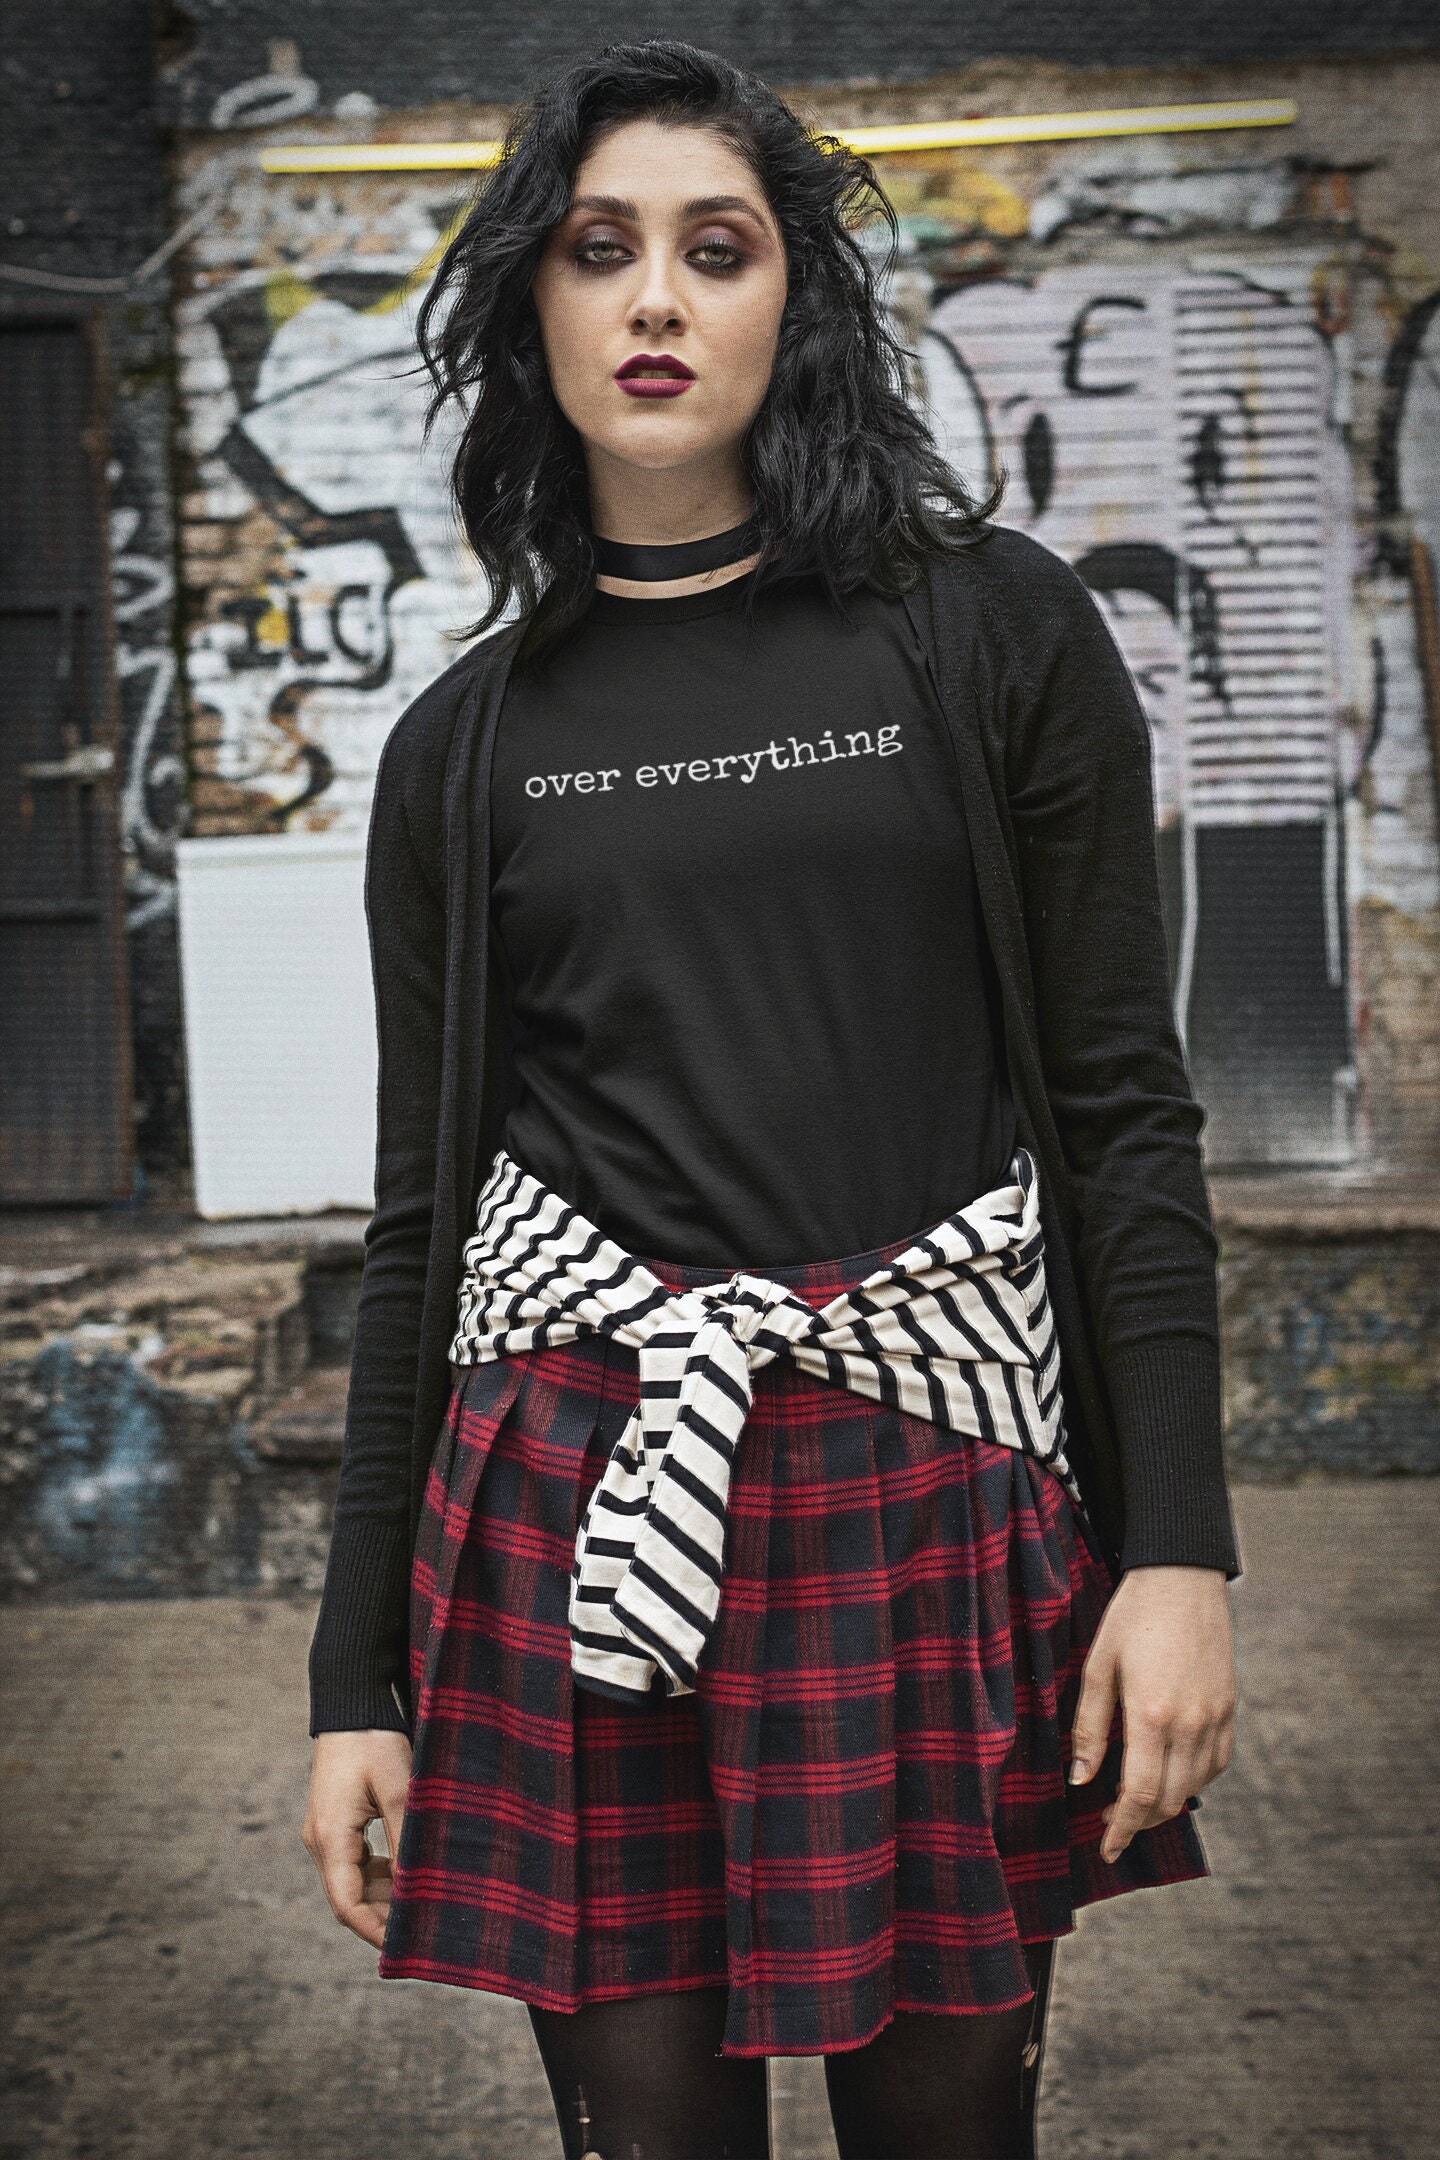 Edgy Alt Goth Clothing Aesthetic Shirt, Over Everything Plus Size Emo E Girl  Clothes 